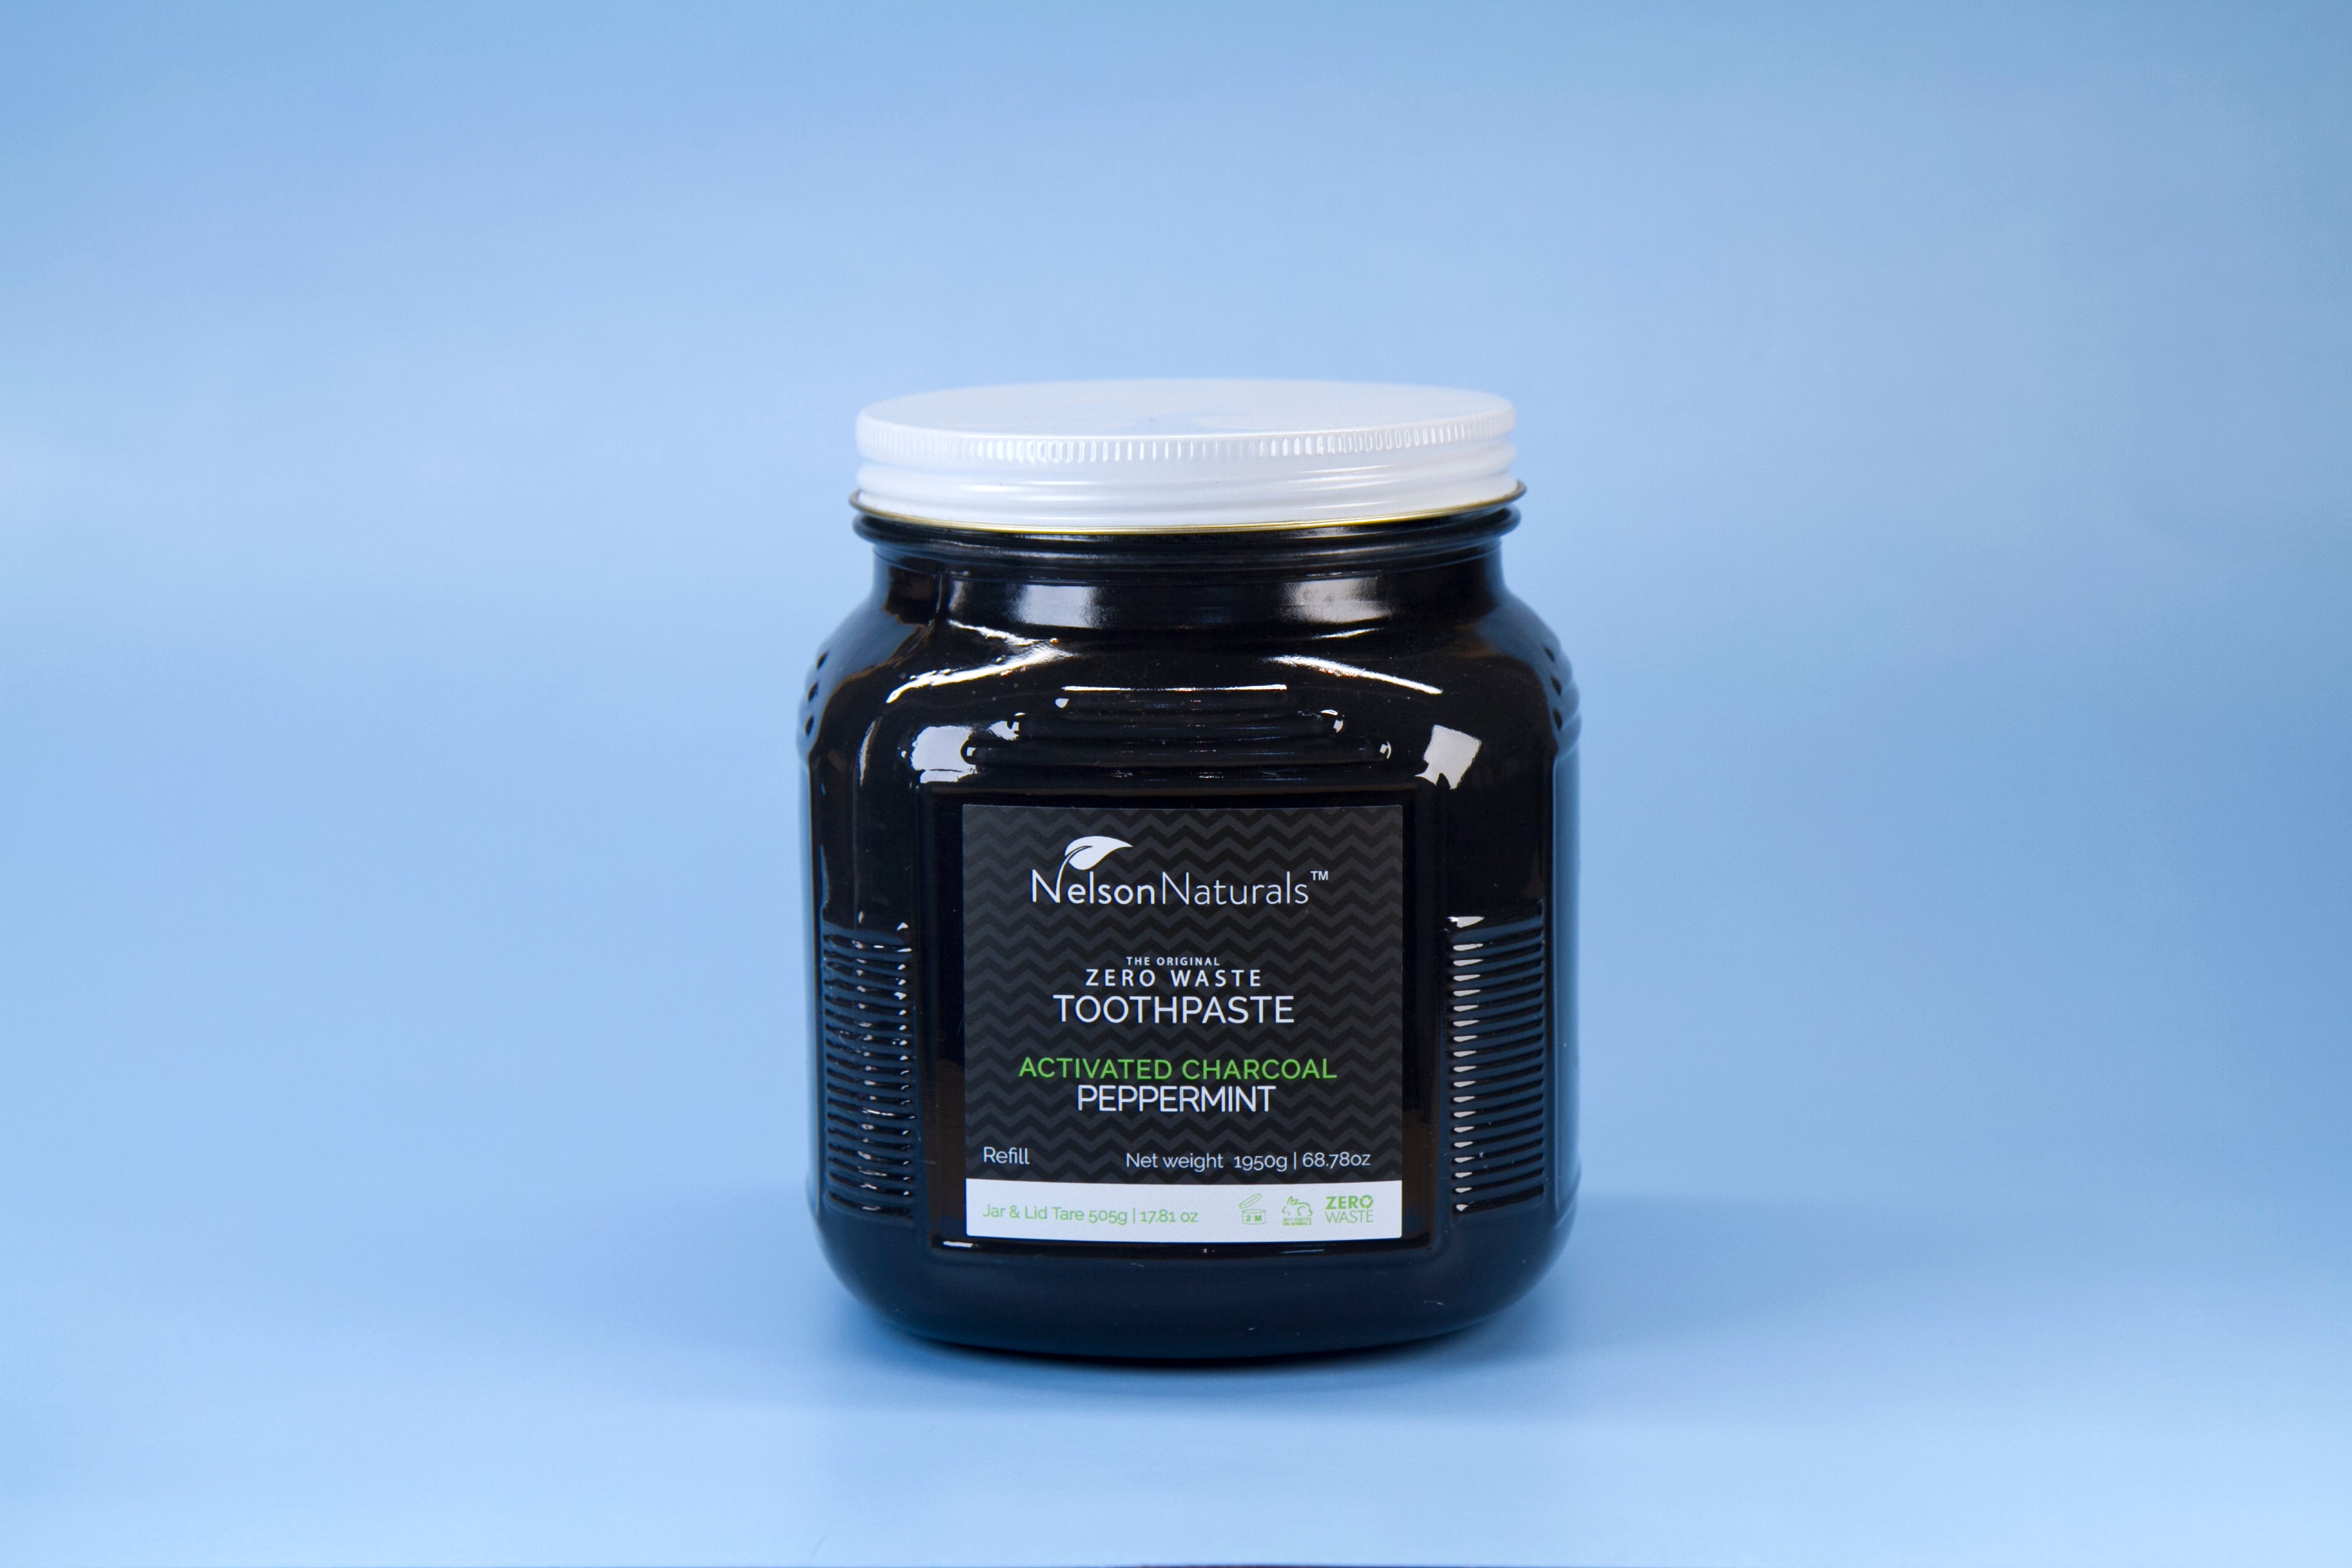 Charcoal Bulk Toothpaste 1950 g - NEW IMPROVED GLASS JAR - Wholesale Toothpaste - nelsonnaturals remineralizing toothpaste